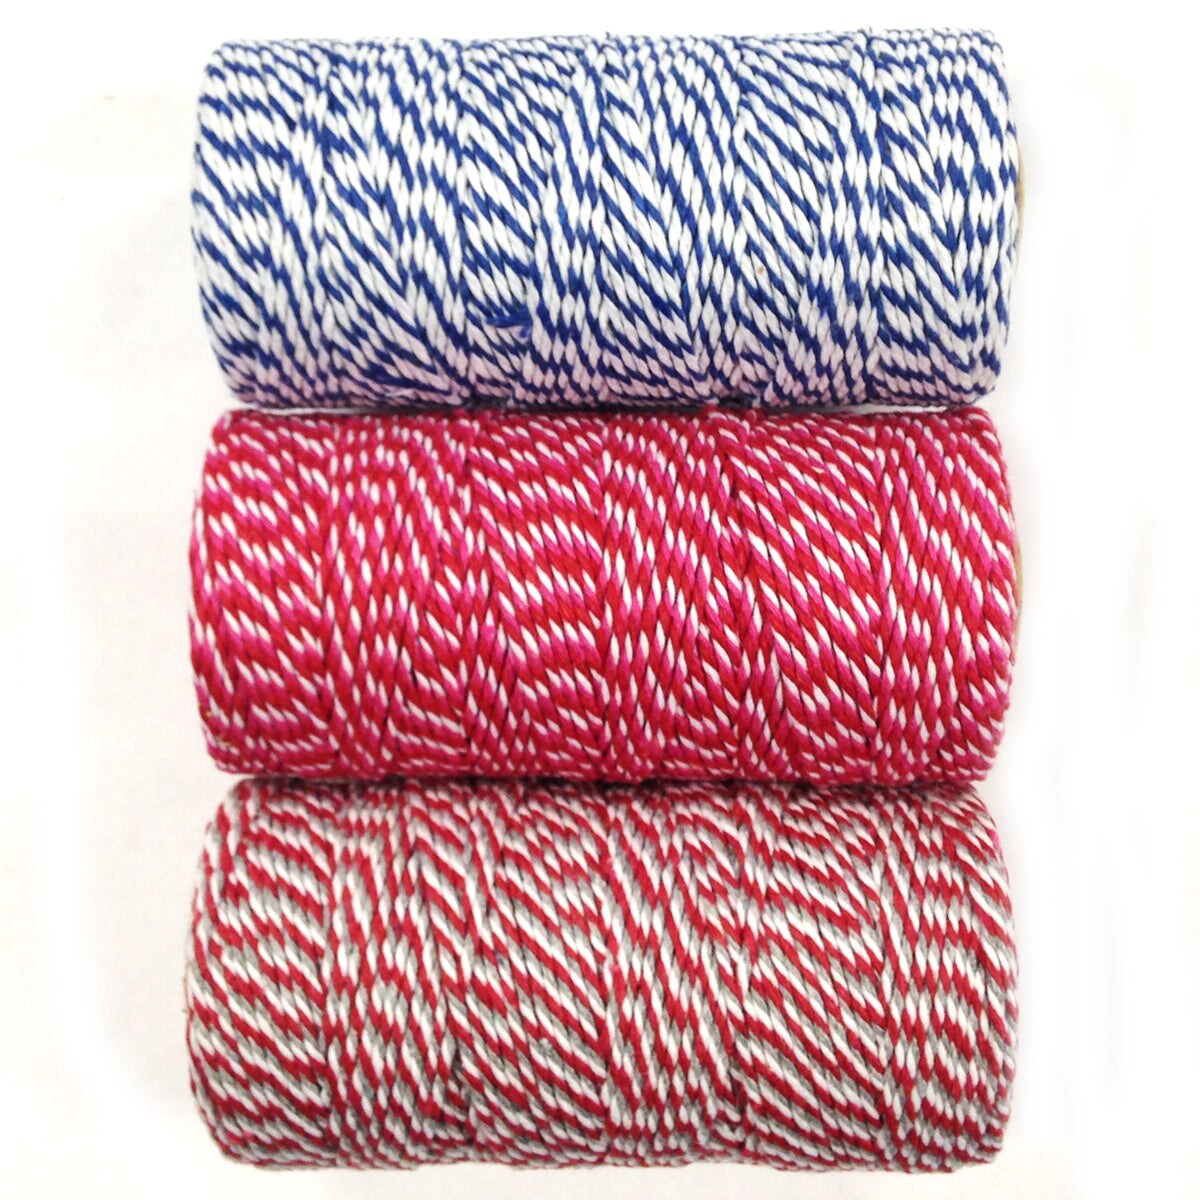 Wrapables Cotton Baker&#x27;s Twine 12ply 330 Yards (Set of 3 Spools x 110 Yards) for Gift Wrapping, Party Decor, and Arts and Crafts (Navy, Red &#x26; Hot Pink, Red &#x26; Grey)